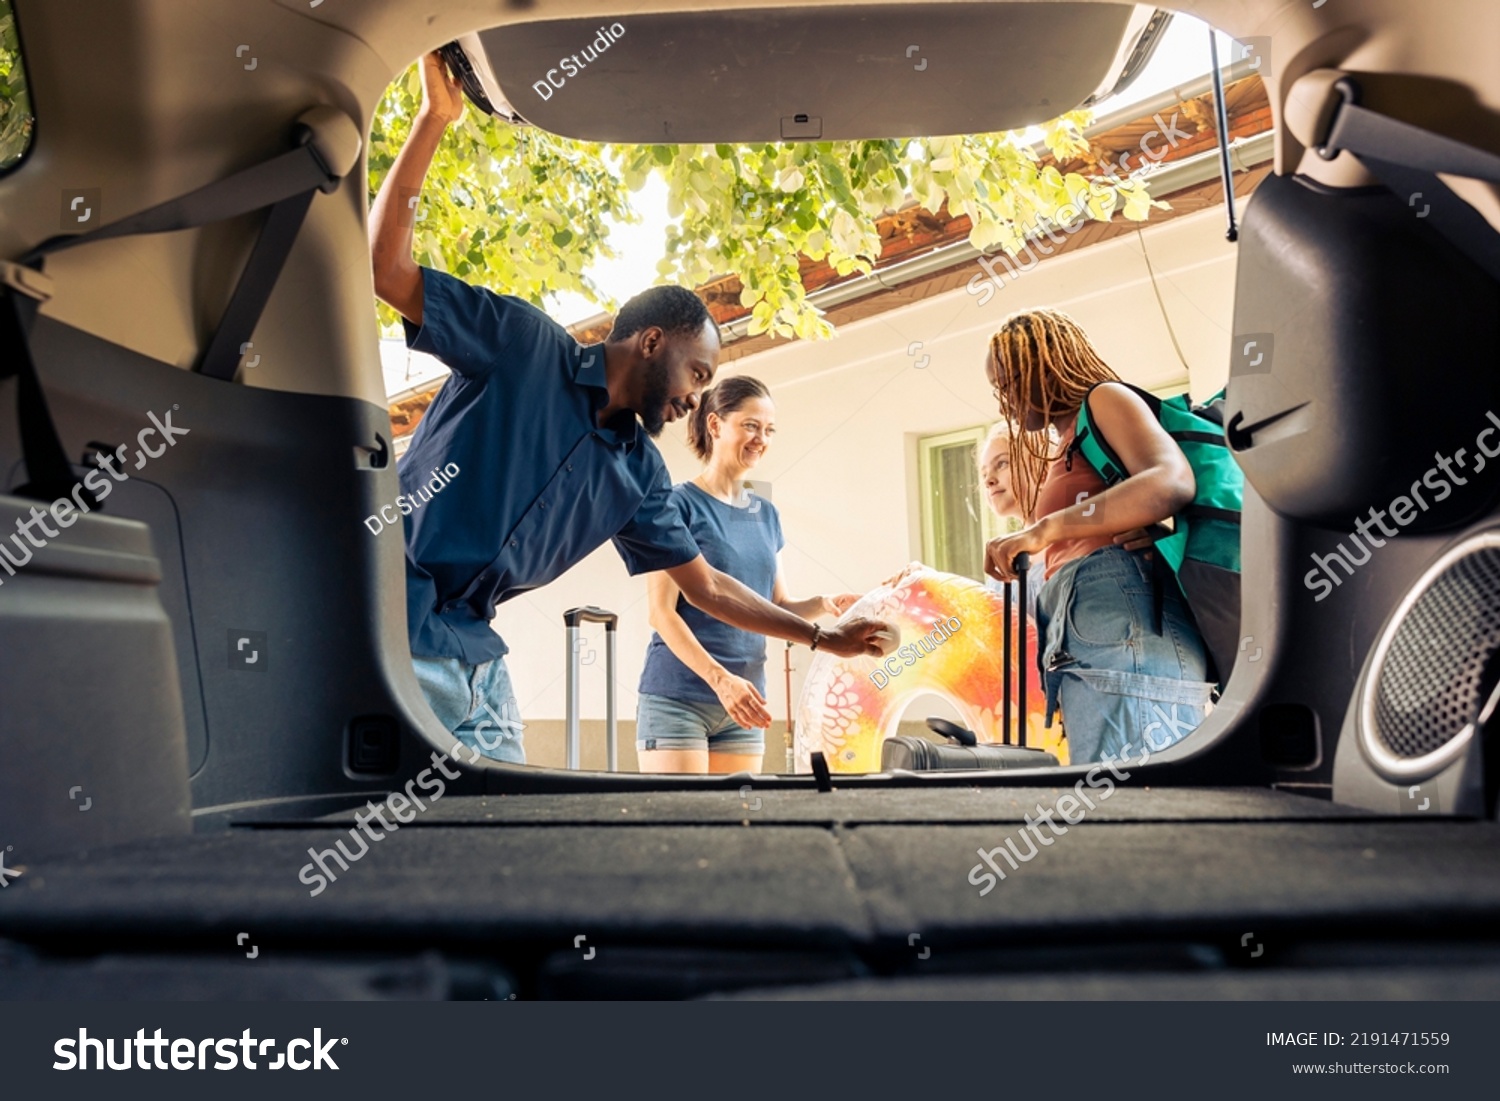 Stock Photo Multiethnic People Loading Baggage In Trunk Preparing Car With Trolley And Travel Bags To Leave On 2191471559 